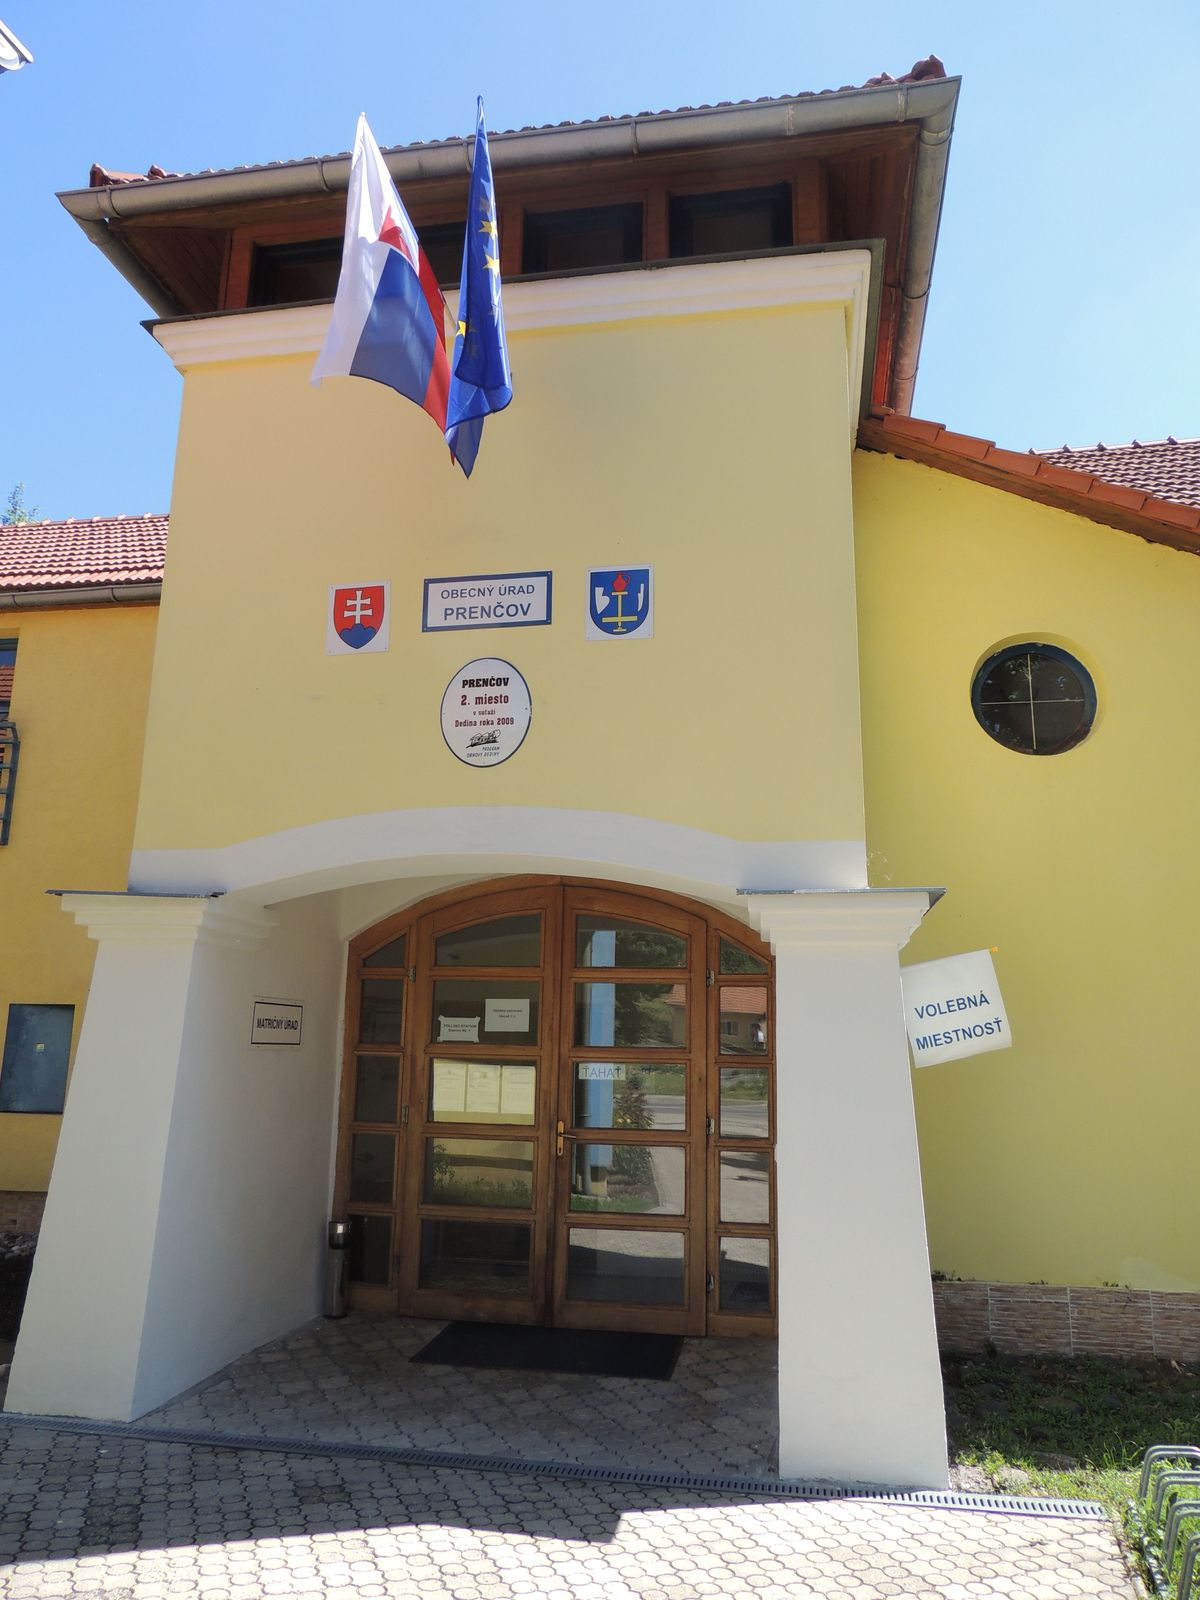 Polling Stations in Slovakia Open for European Parliament Elections